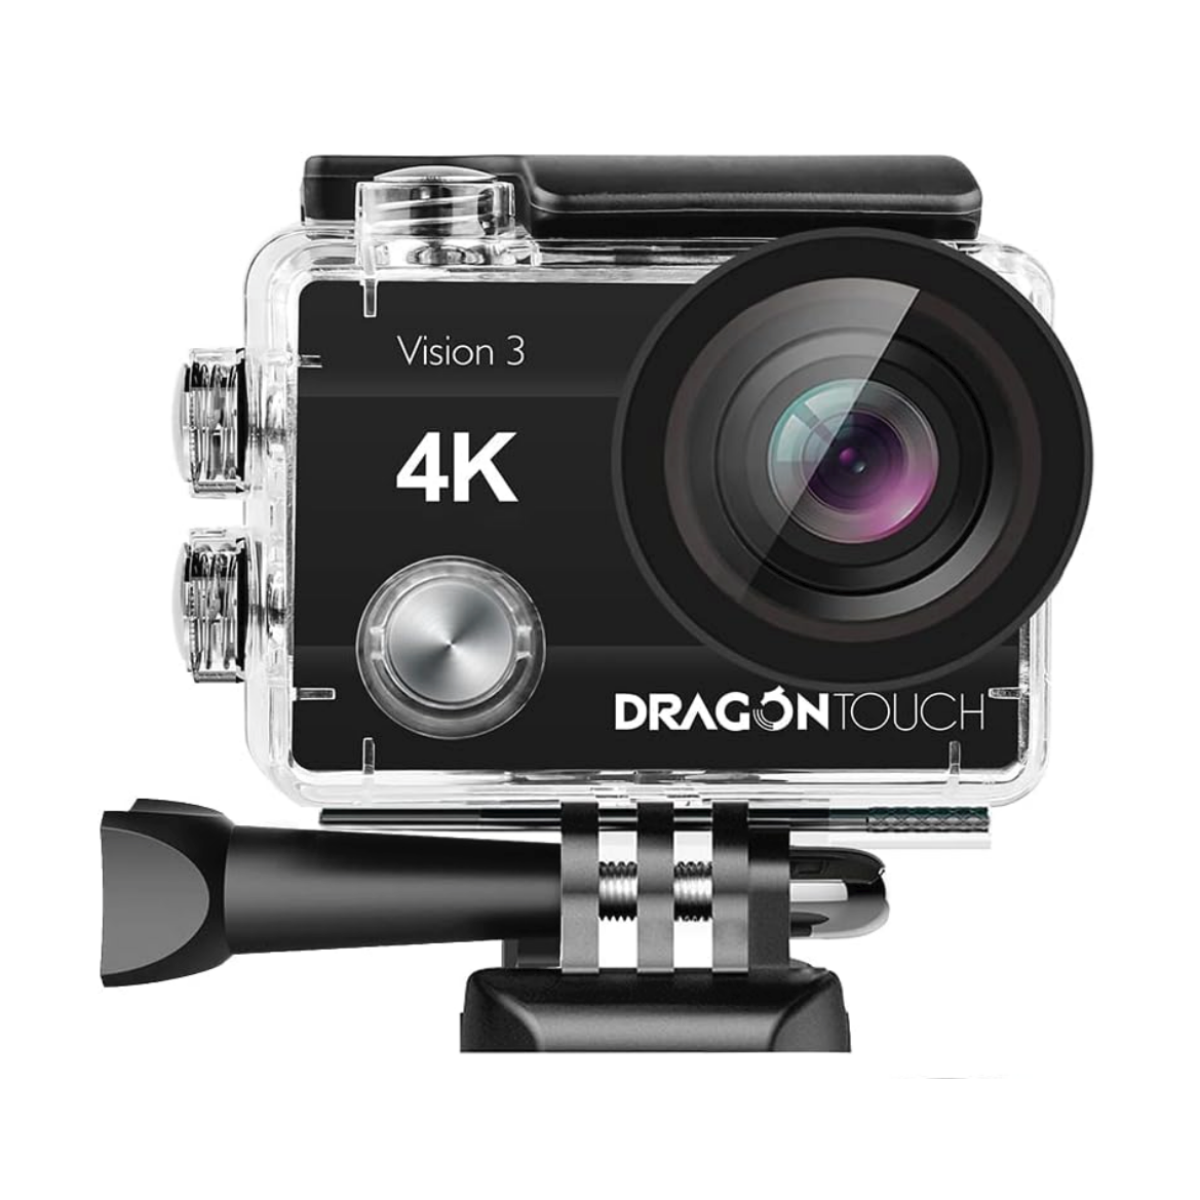 A Dragon Touch Vision 3 4K action camera